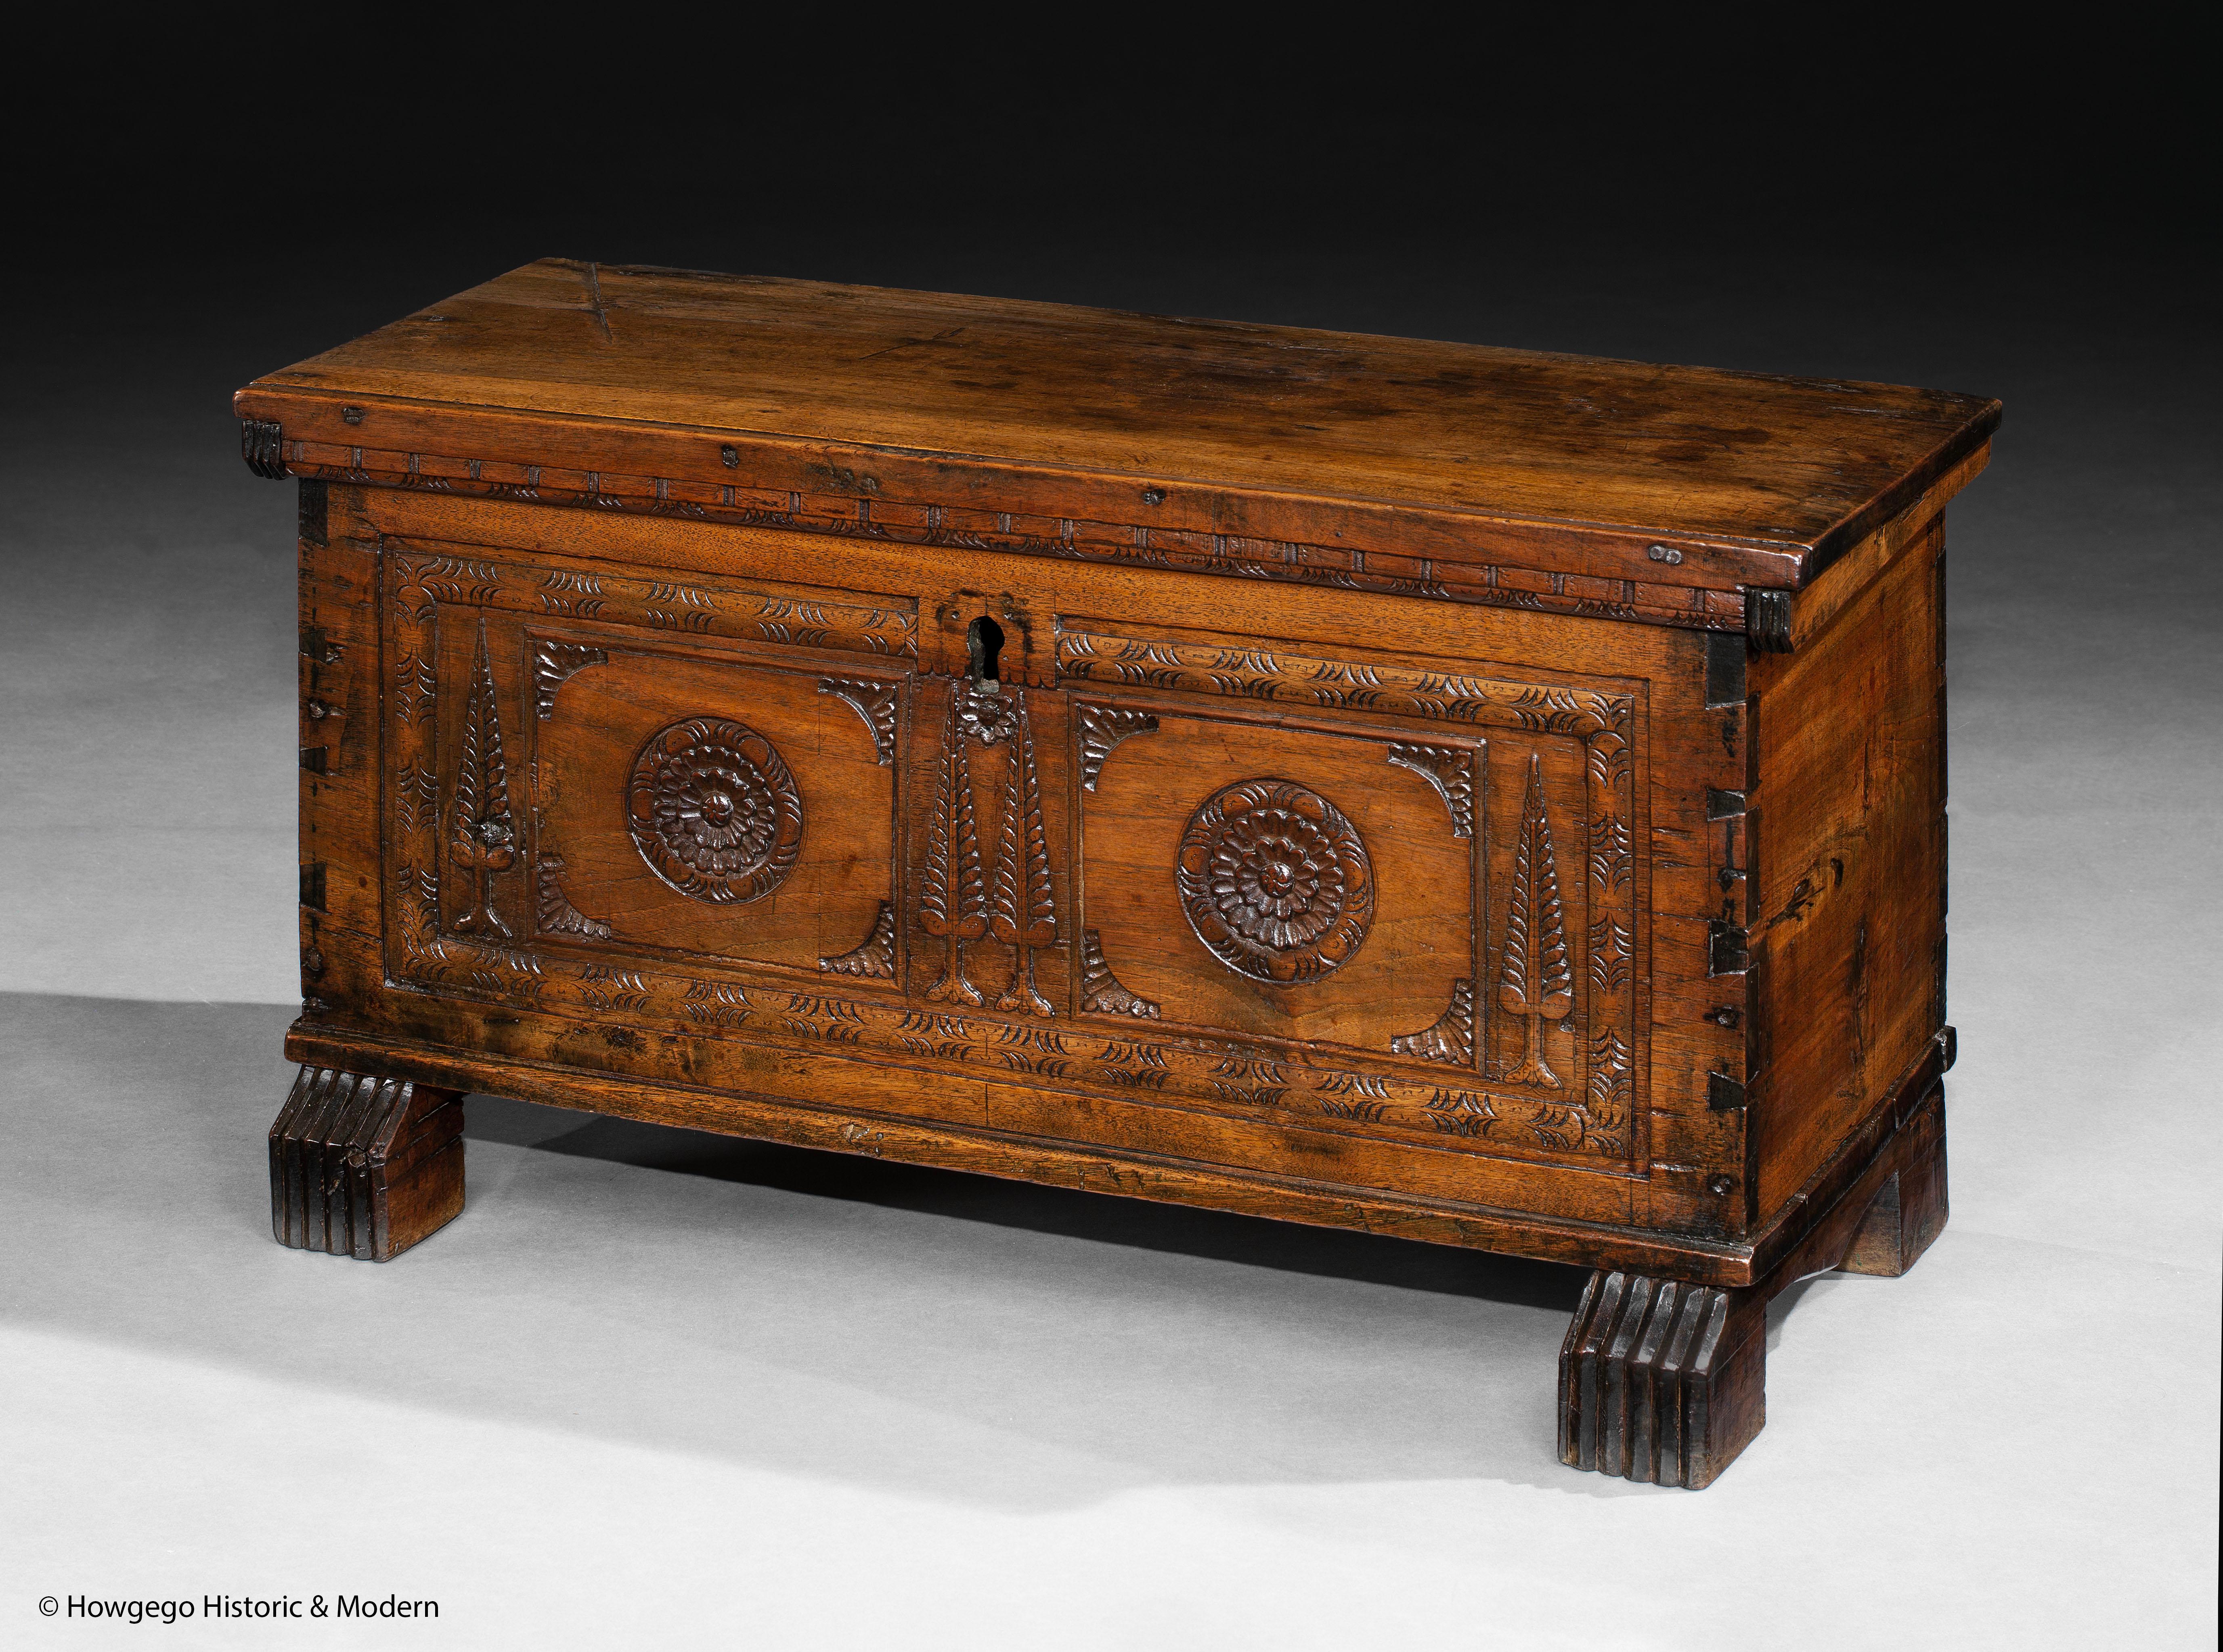 Museum Quality, Small, Spanish, Walnut Chest With Rare Cypress Tree Carving, A Single Plank Top & Outstanding Colour & Patina

- Rare carved decoration of cypress trees alongside more traditional Spanish ornamentation
- Rare small size
- Exceptional